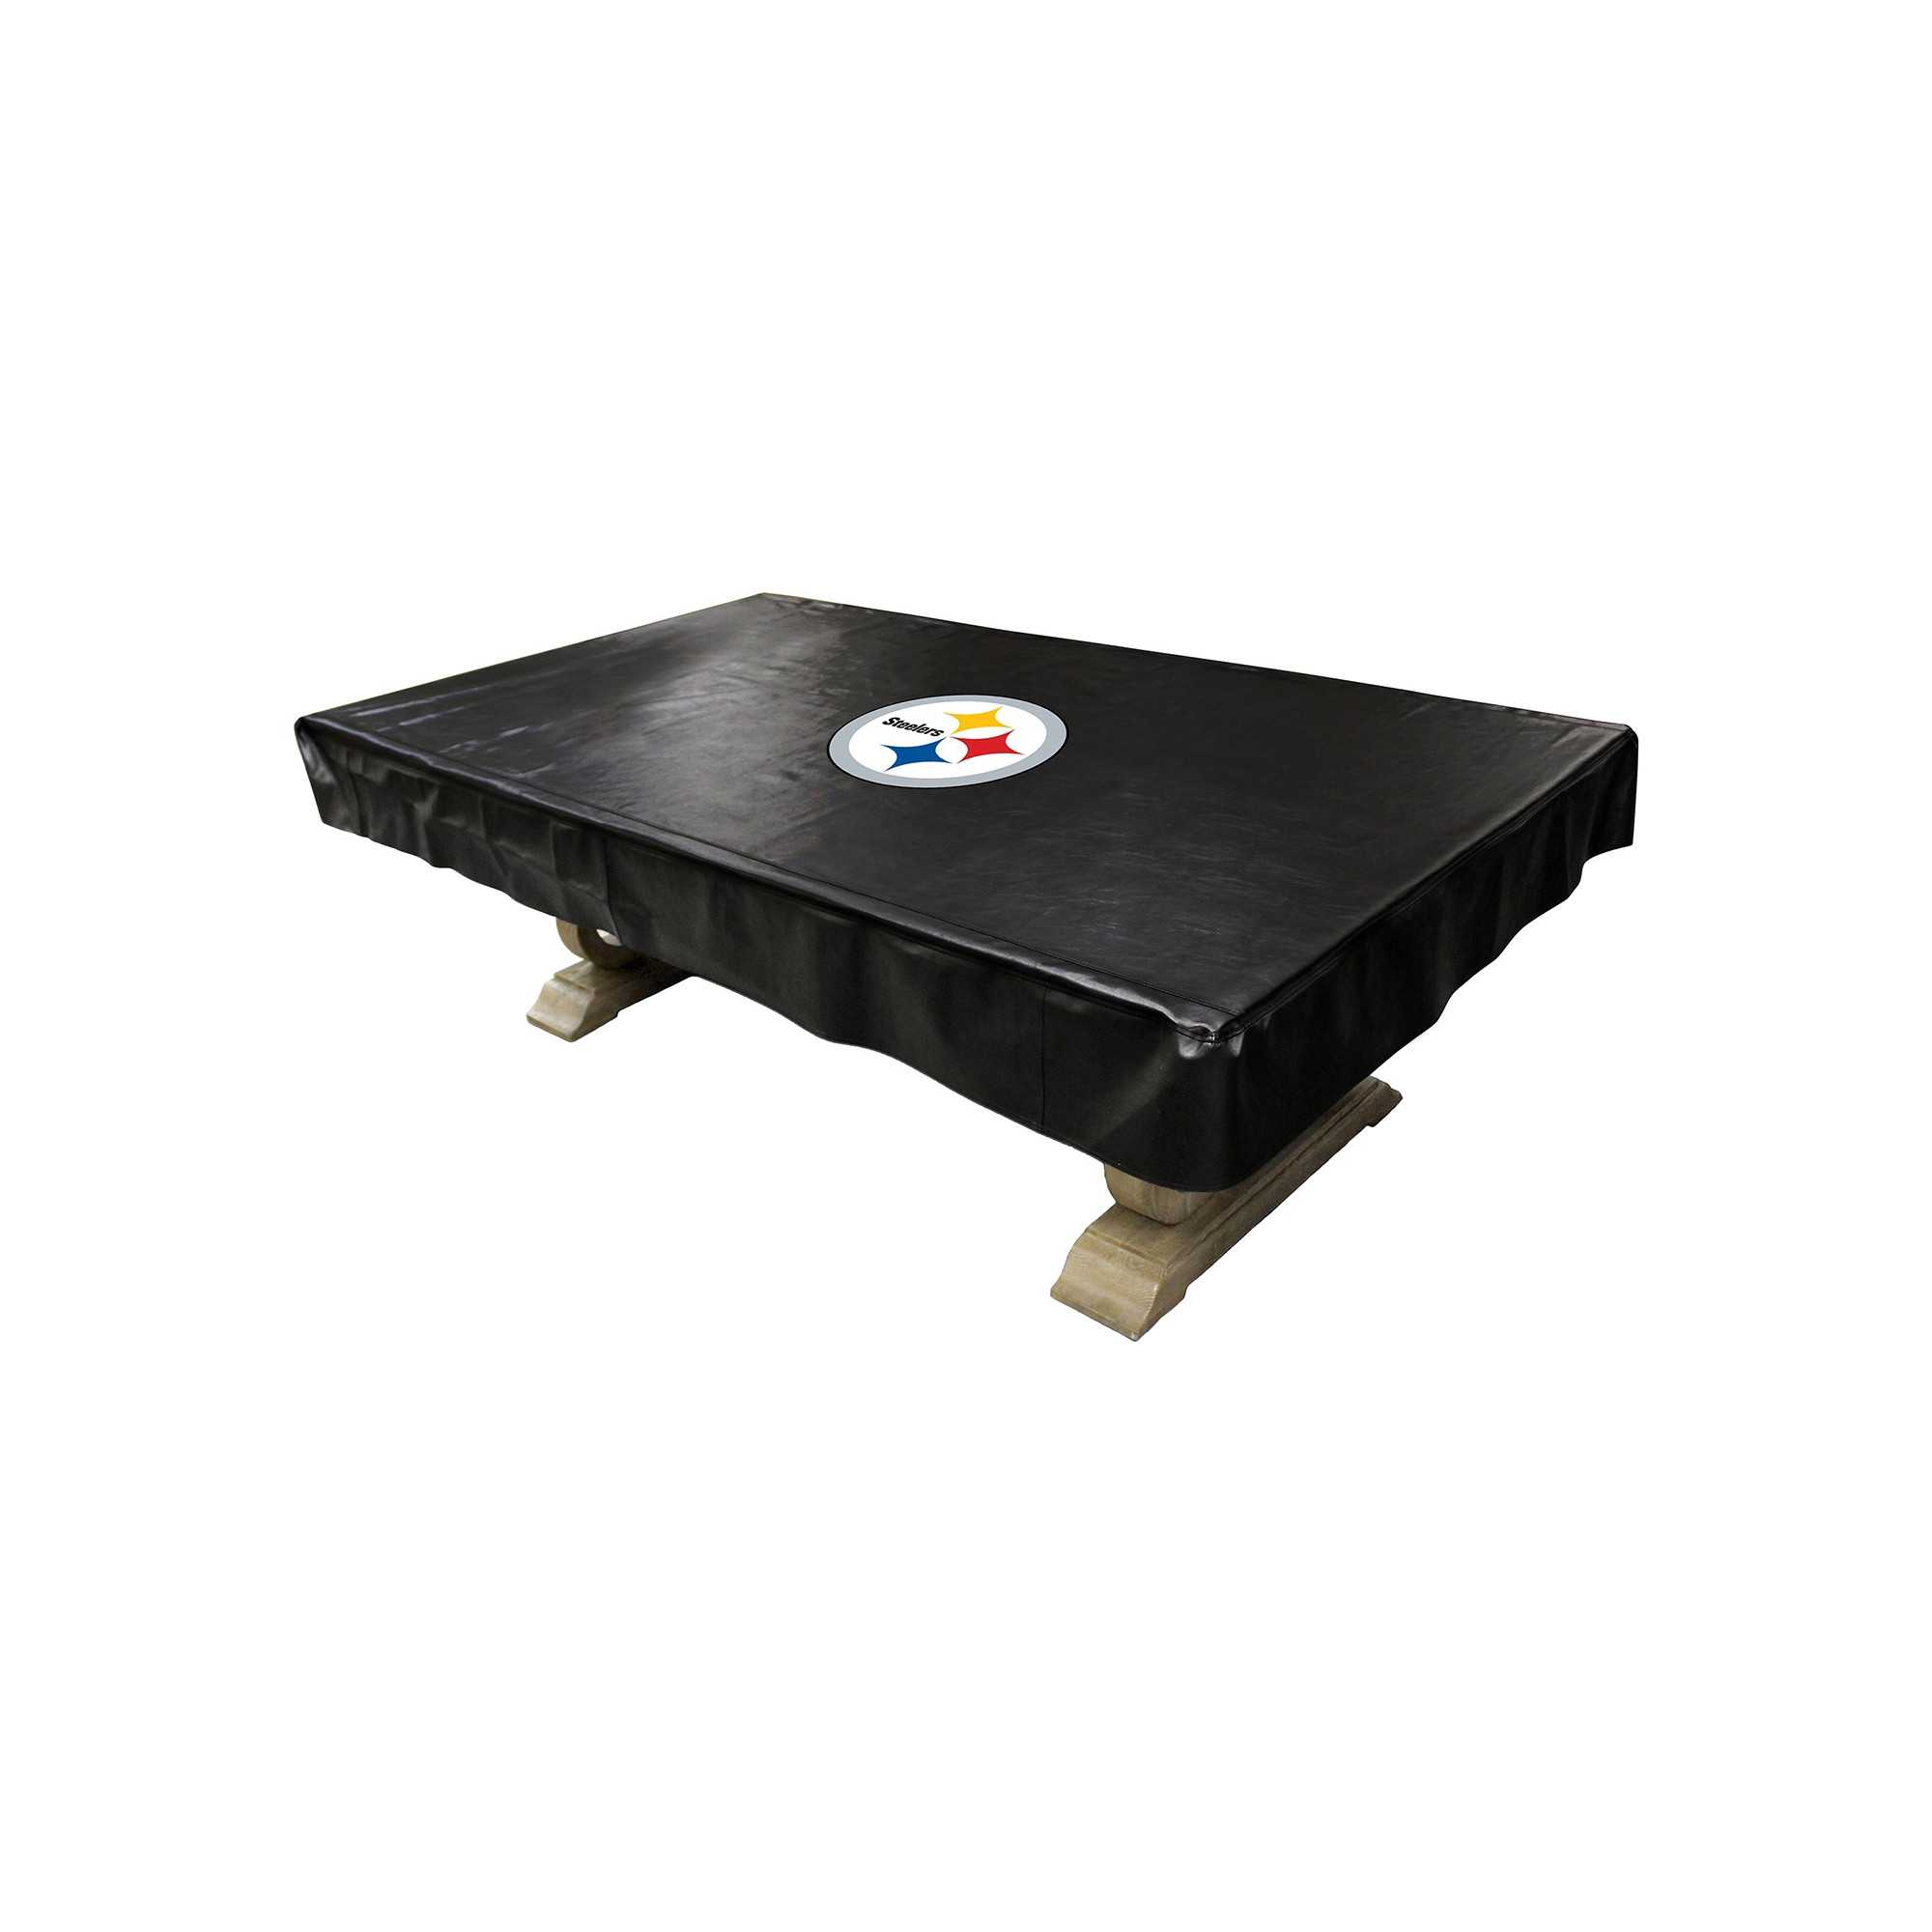 PITTSBURGH STEELERS 8' DELUXE POOL TABLE COVER